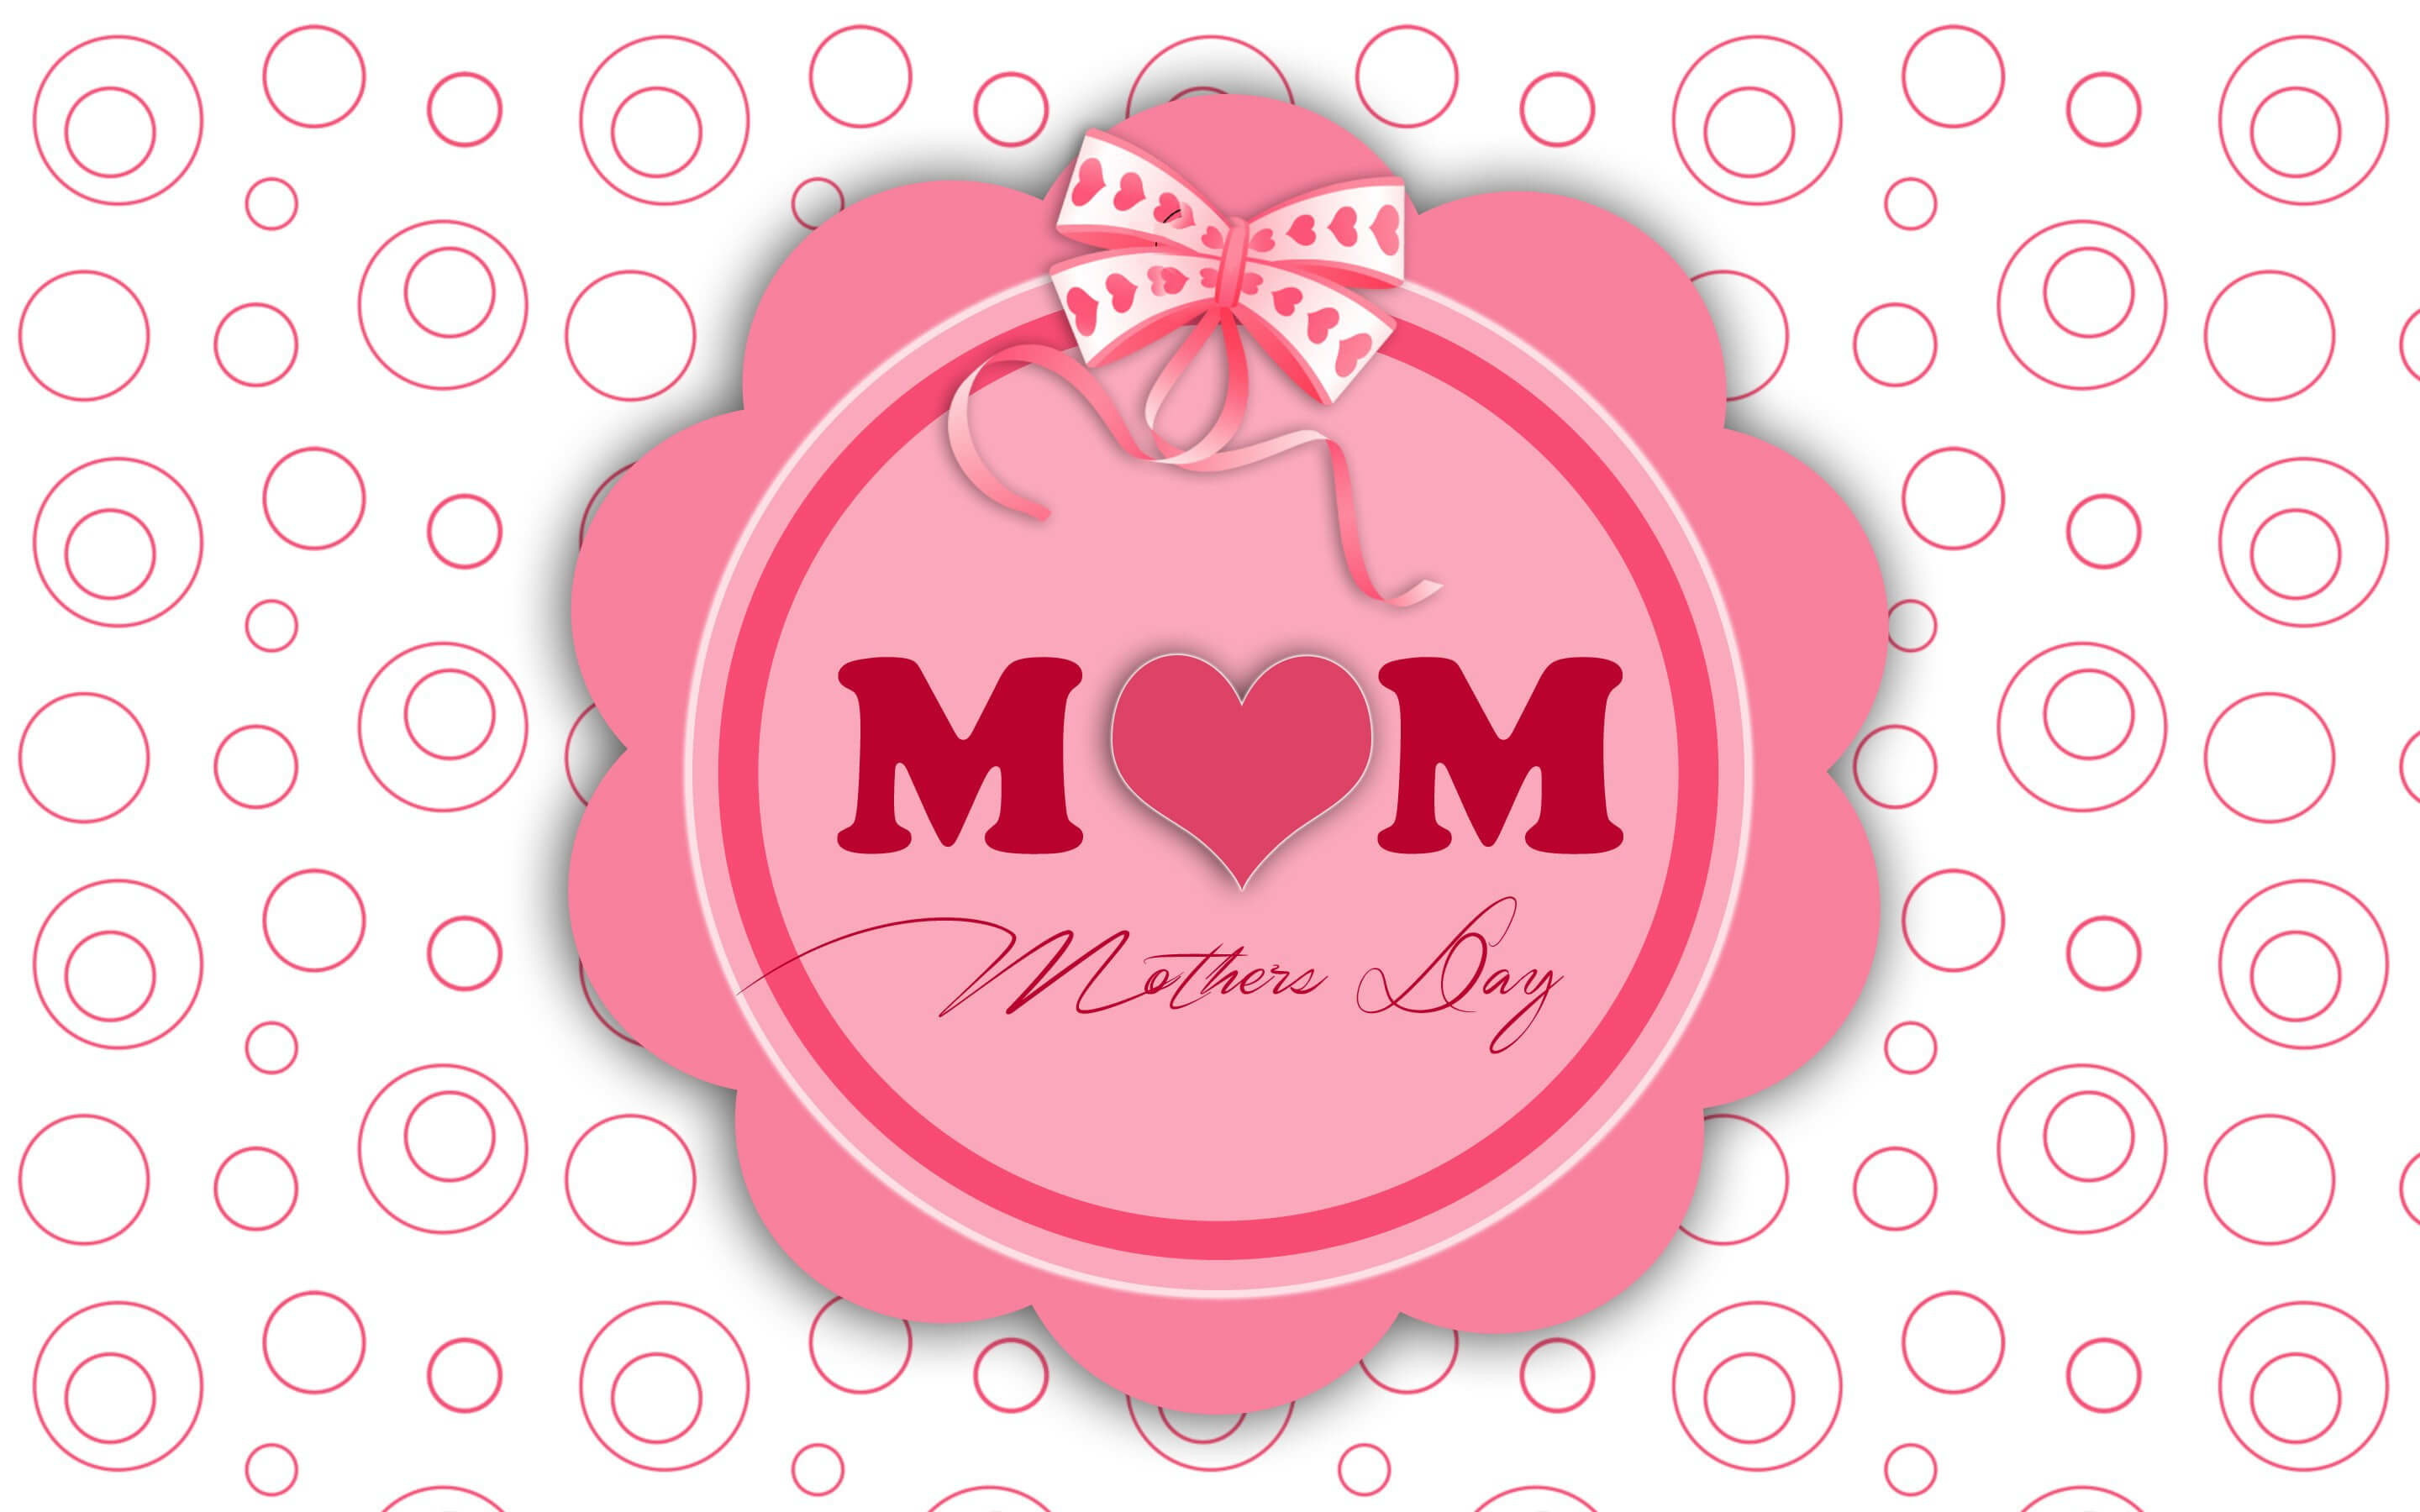 Happy Mothers Day Greetings Wishes Image Photo Hd Wallpaper - Mm Images Hd Download - HD Wallpaper 